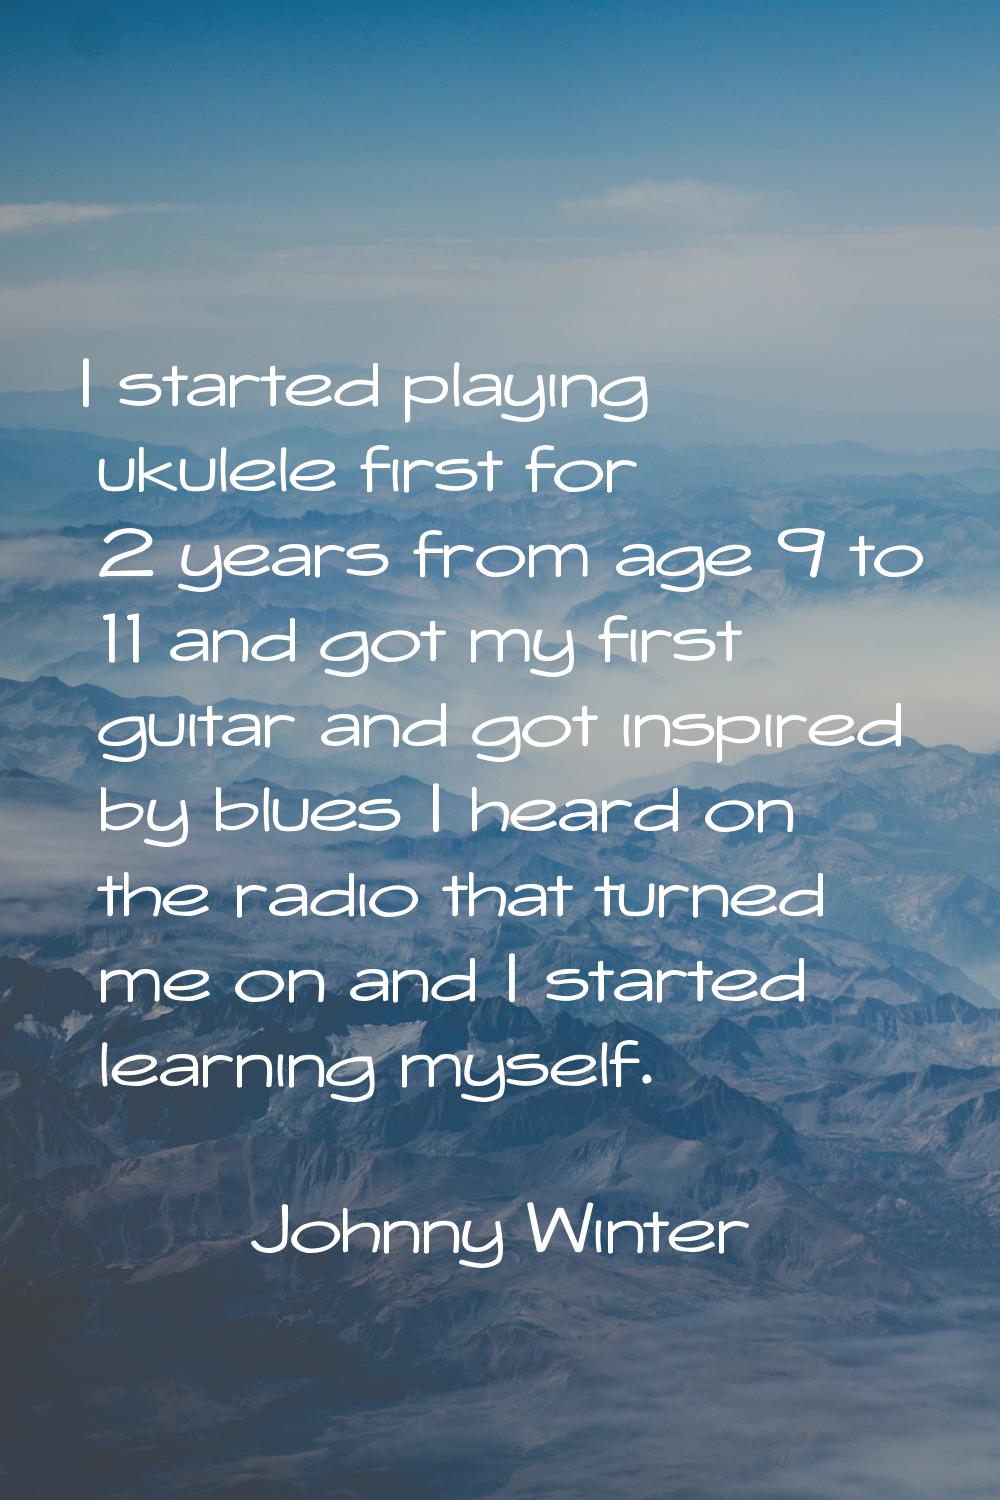 I started playing ukulele first for 2 years from age 9 to 11 and got my first guitar and got inspir